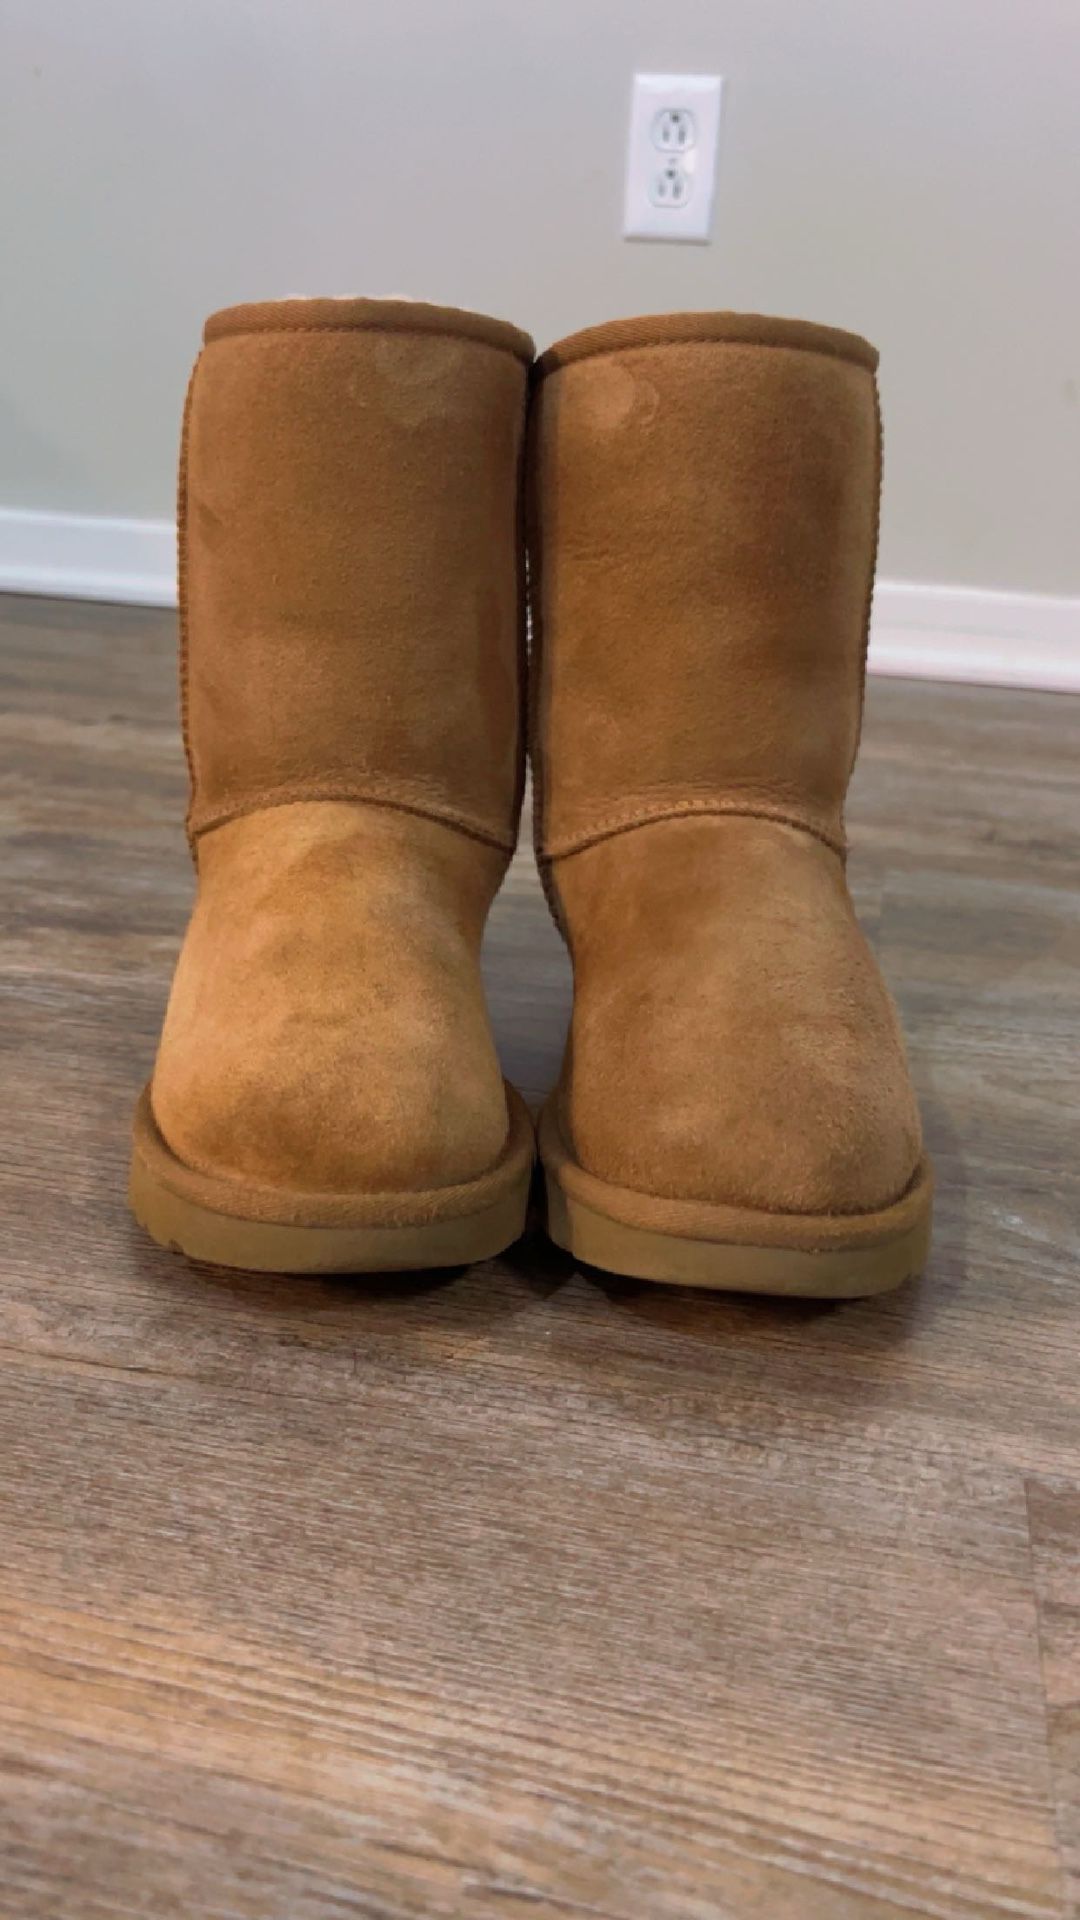 2 PAIRS OF UGGS MINI/CLASSIC II Size 5 And 6